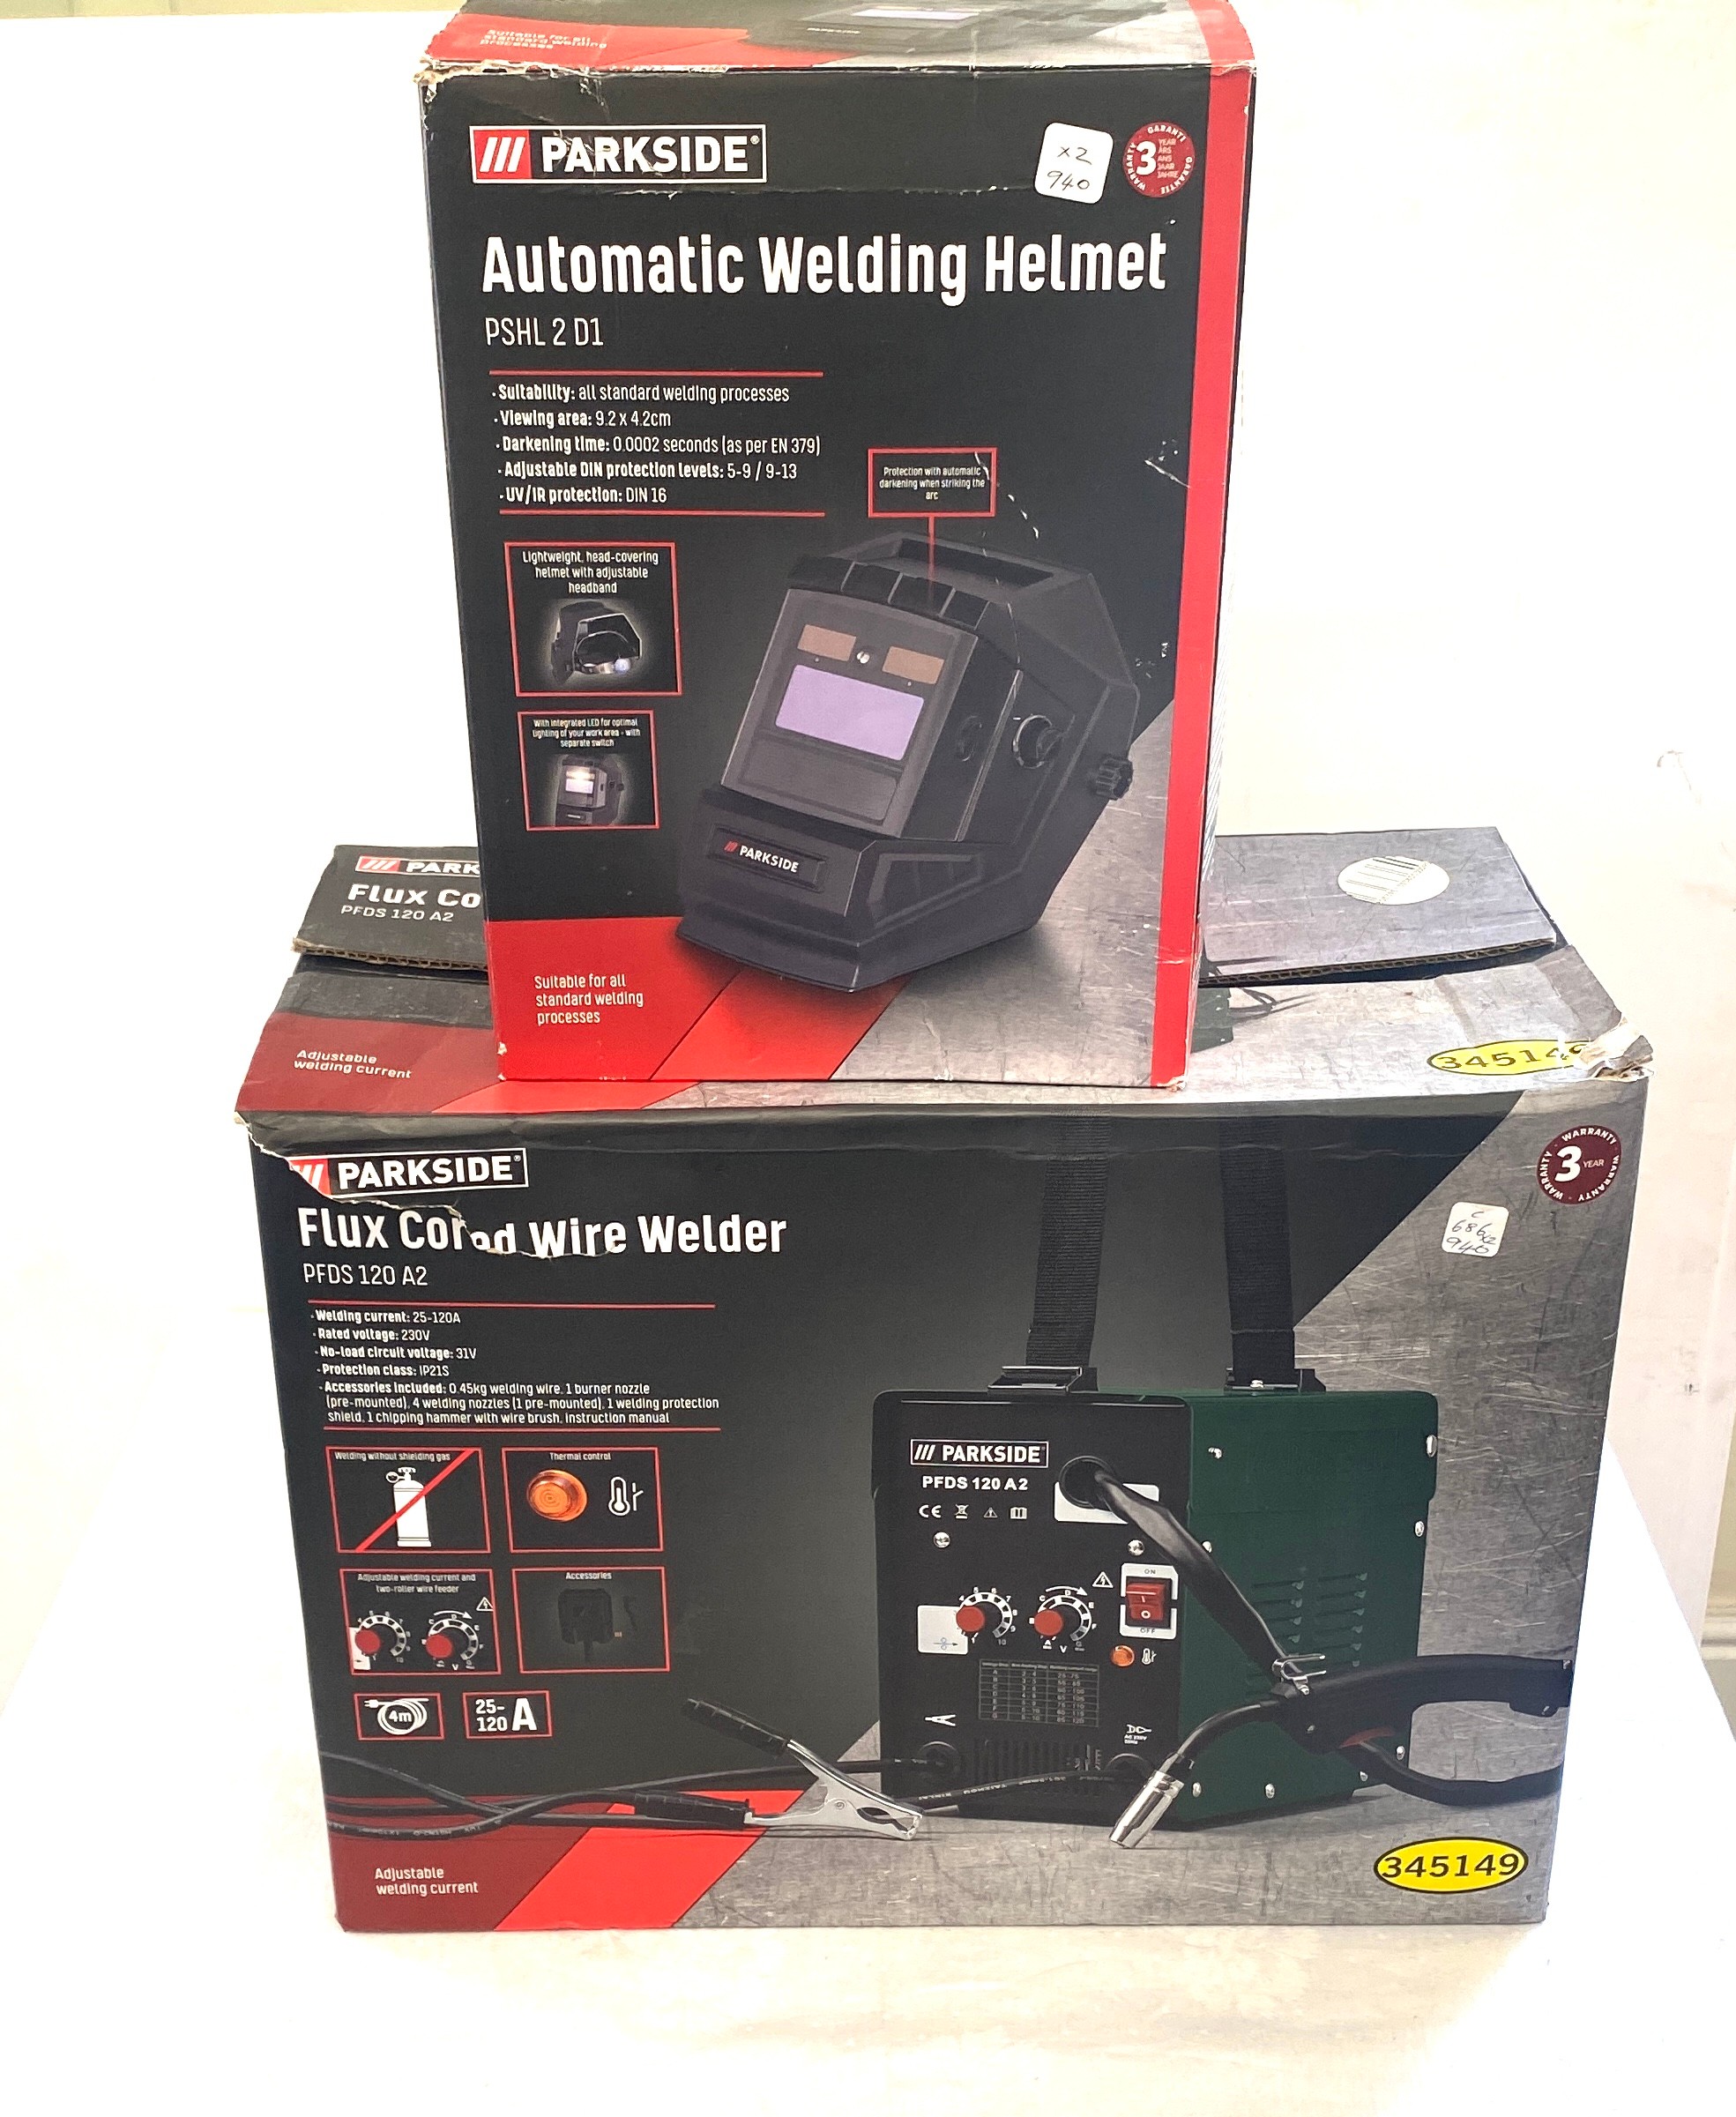 Parkside Flux Cored wired Welder, Parkside automatic welding helmet, both new in boxes